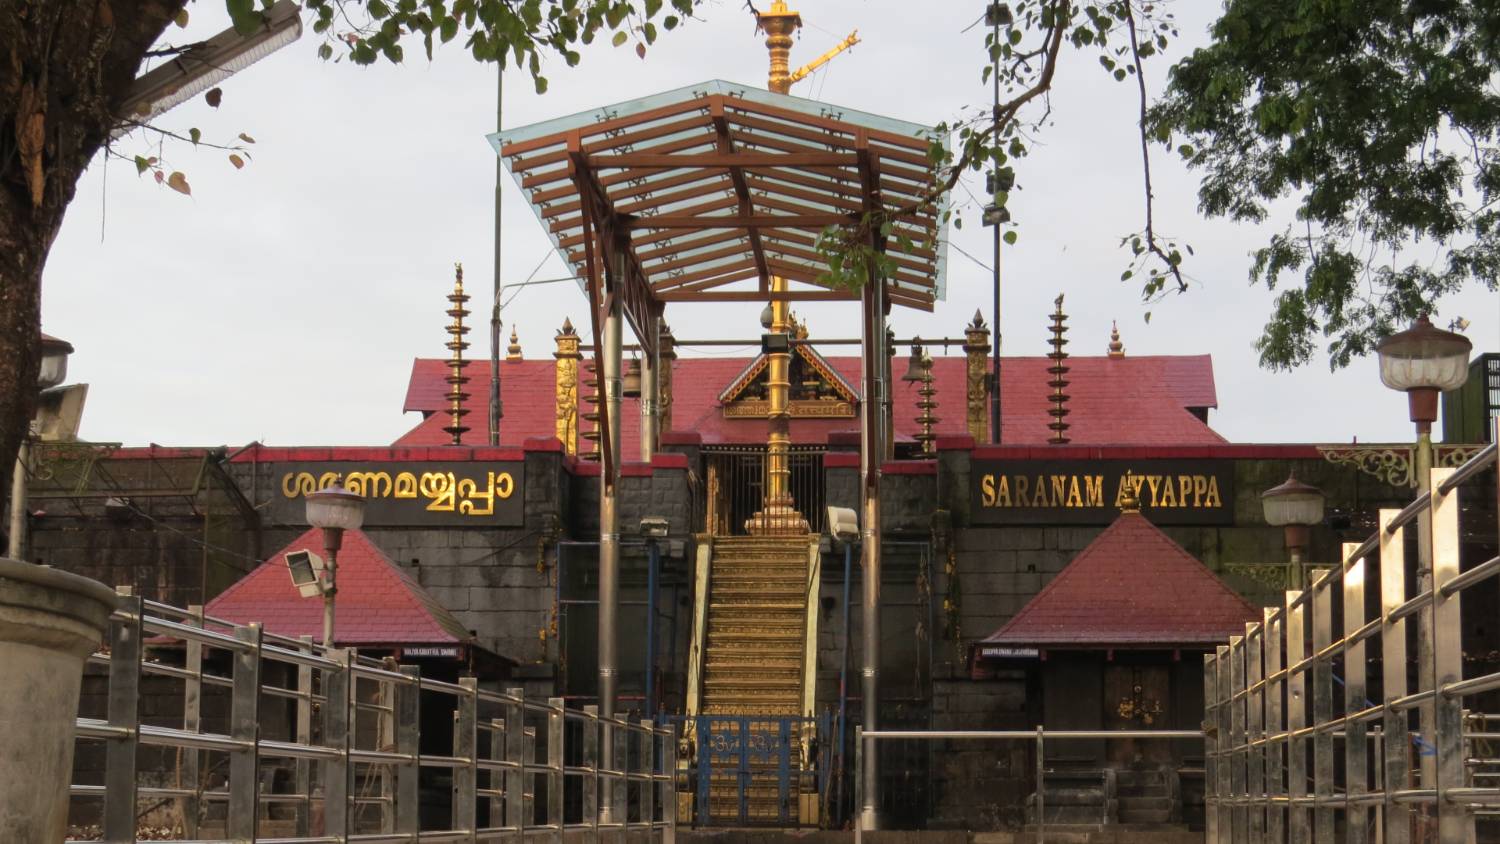 The Sabarimala temple will be filled with thousands of pilgrims at a time during mandala season (Creative Commons)